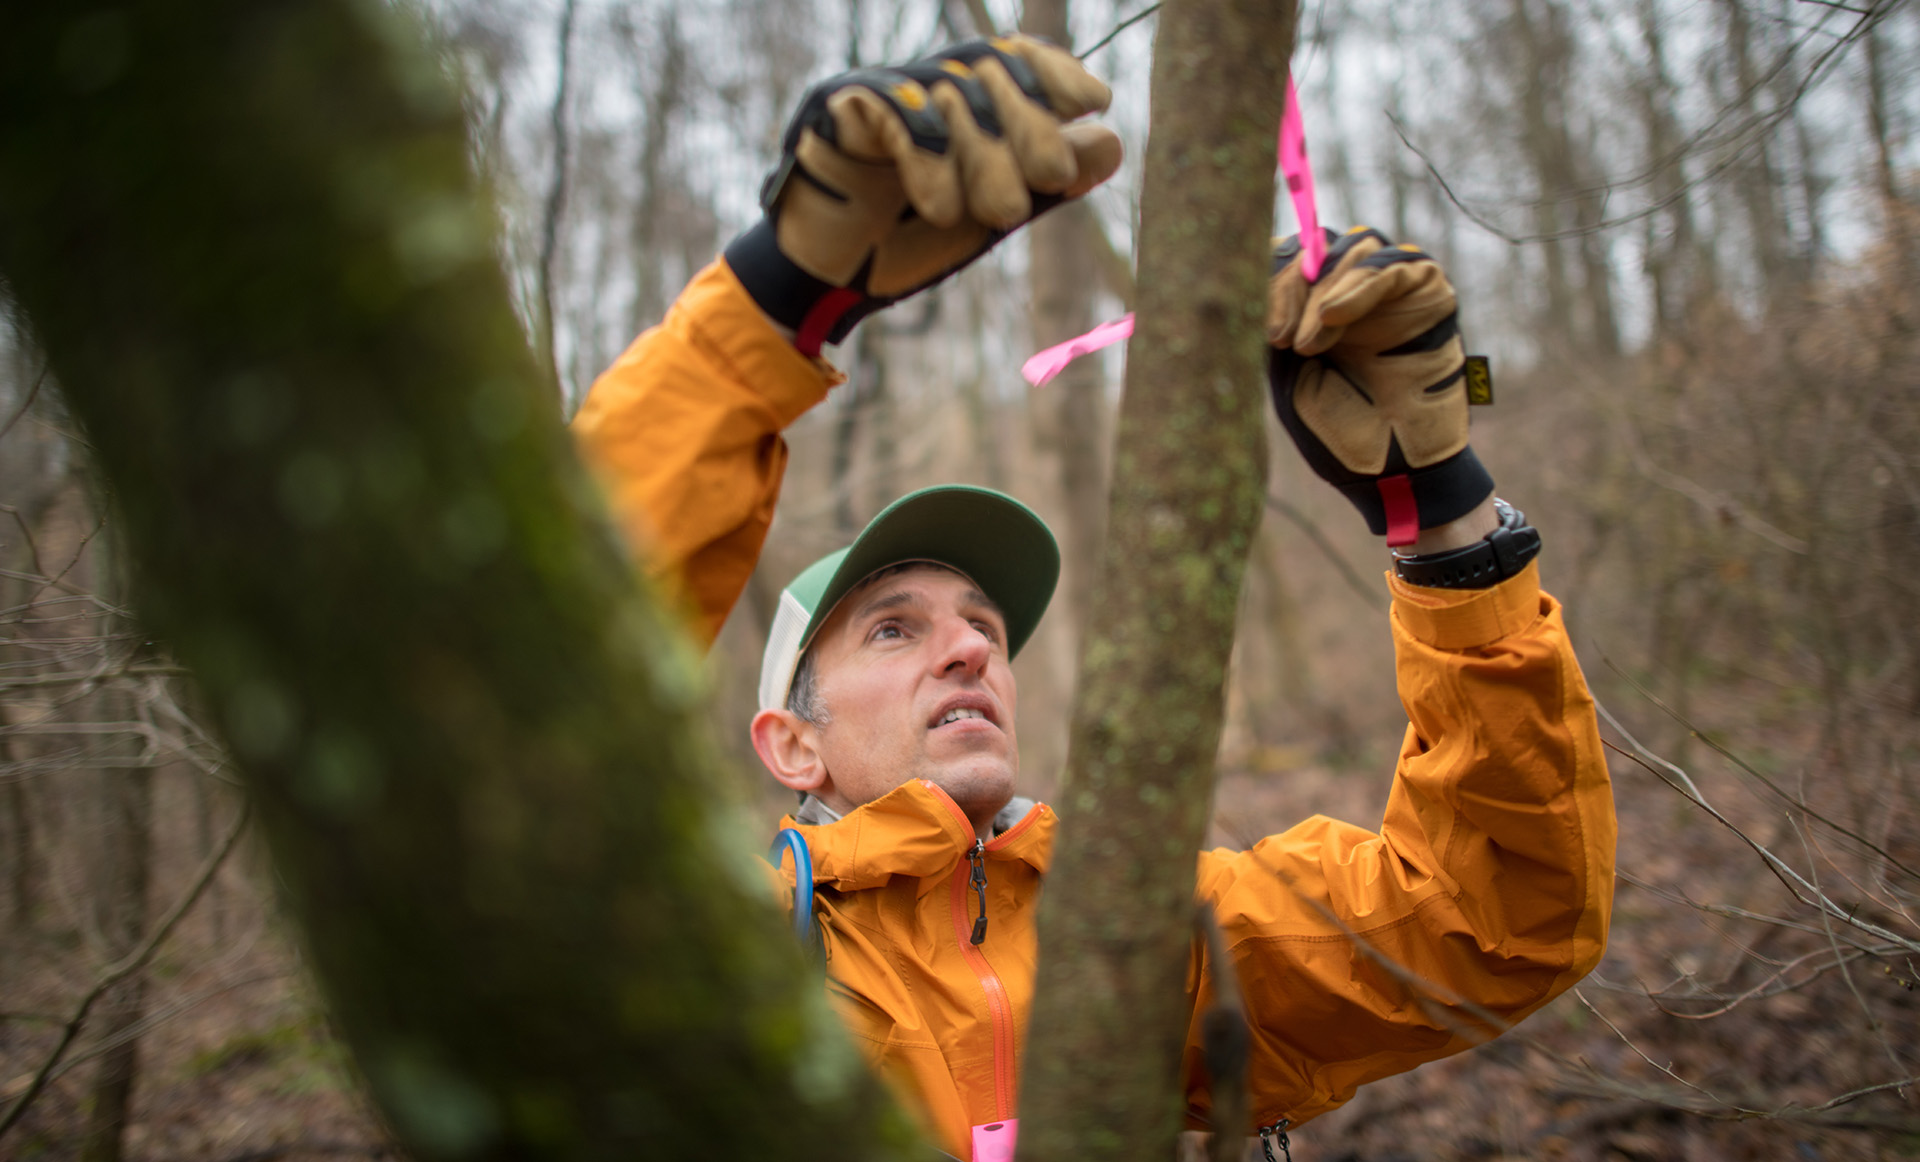 Pete Kotses ties indicator line on a tree branch in the woods